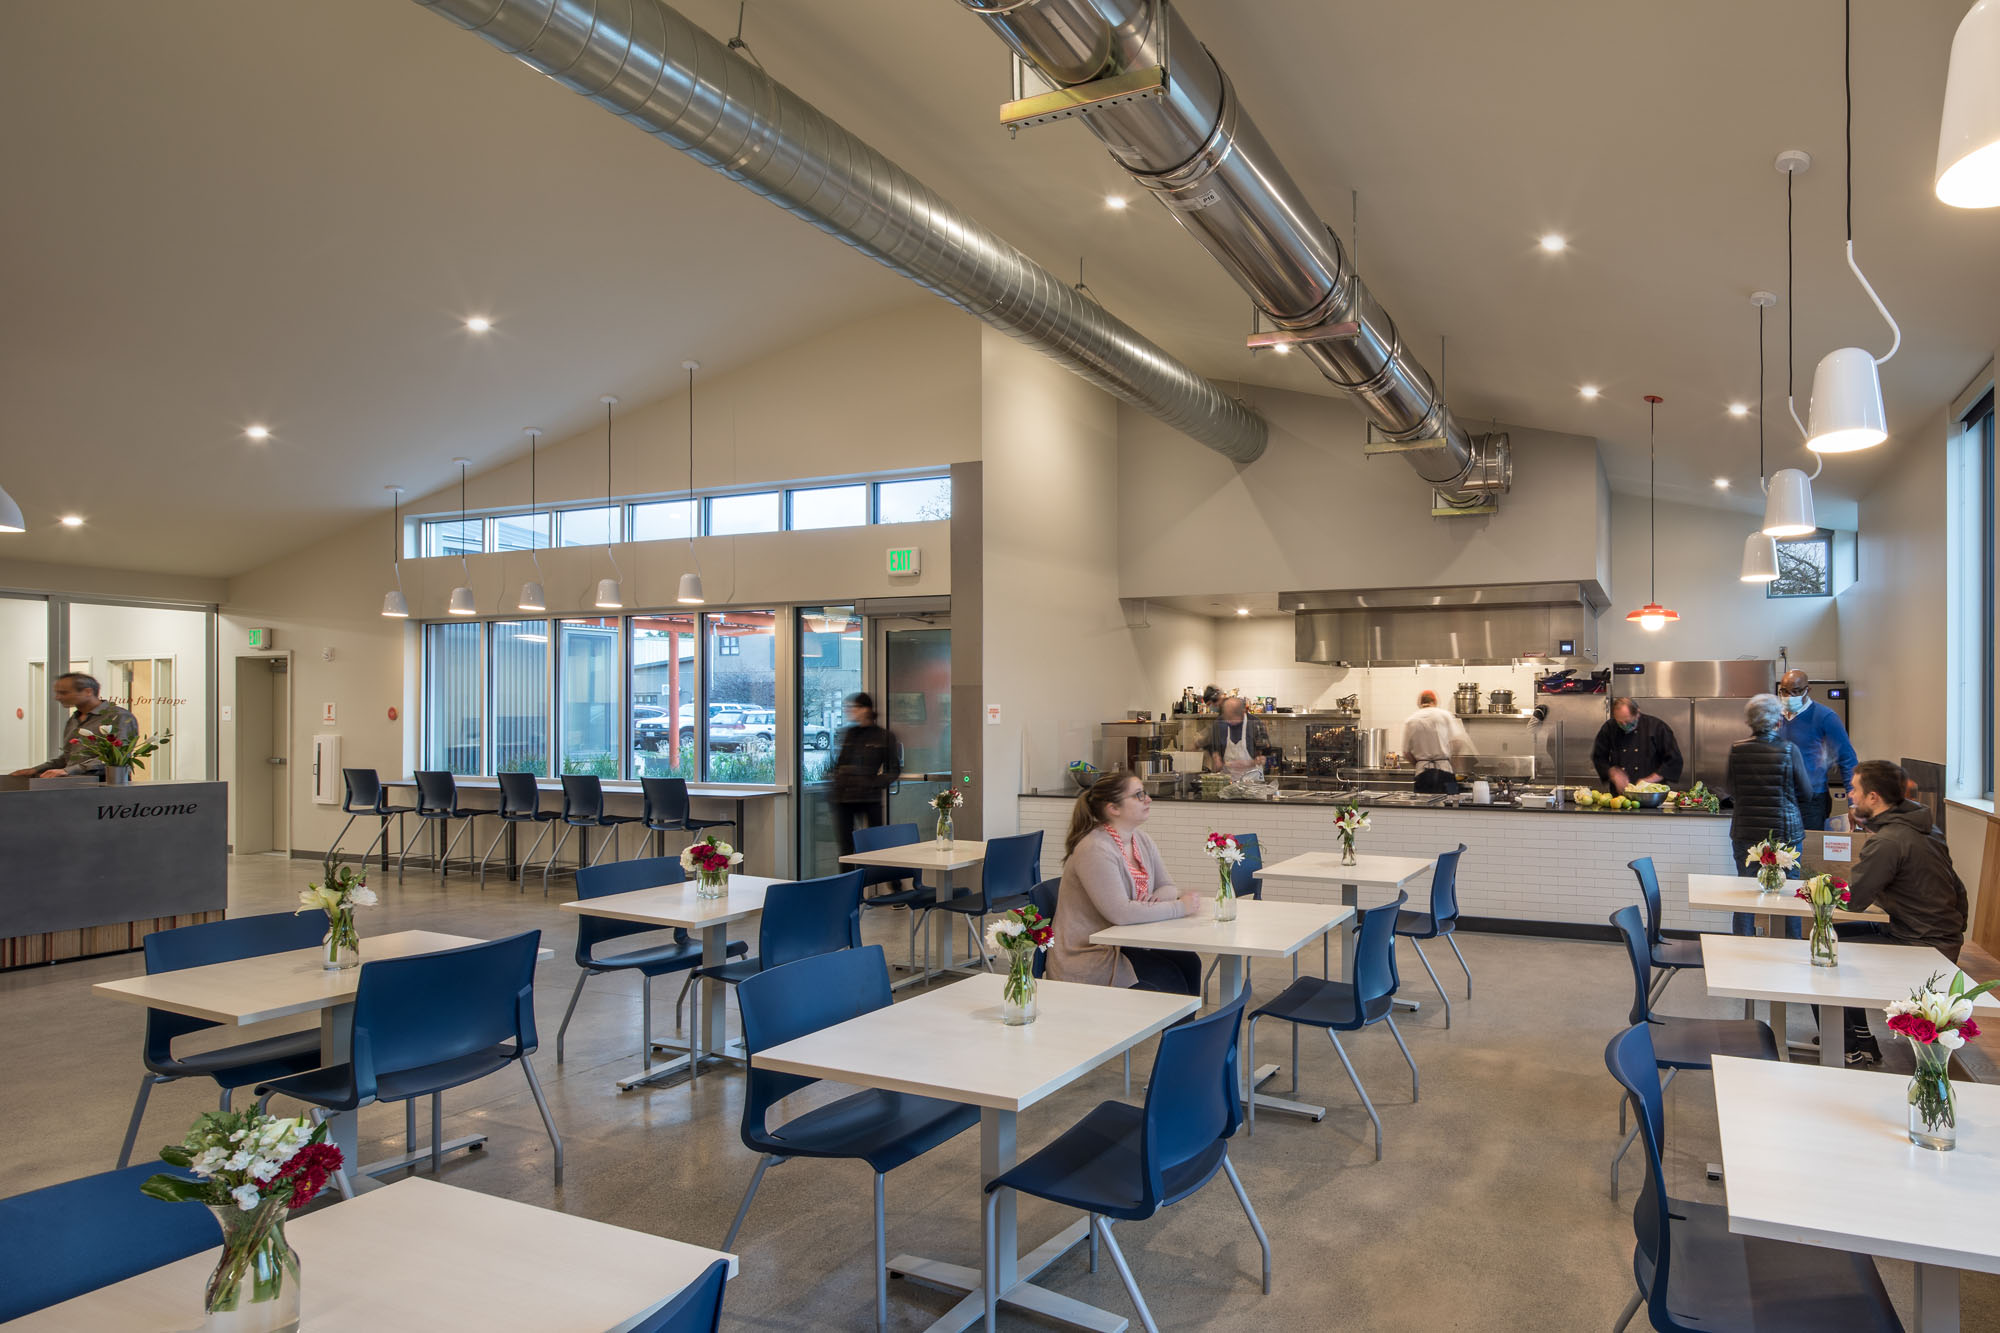 interior photograph of the Ballard Food Bank cafe and commercial kitchen